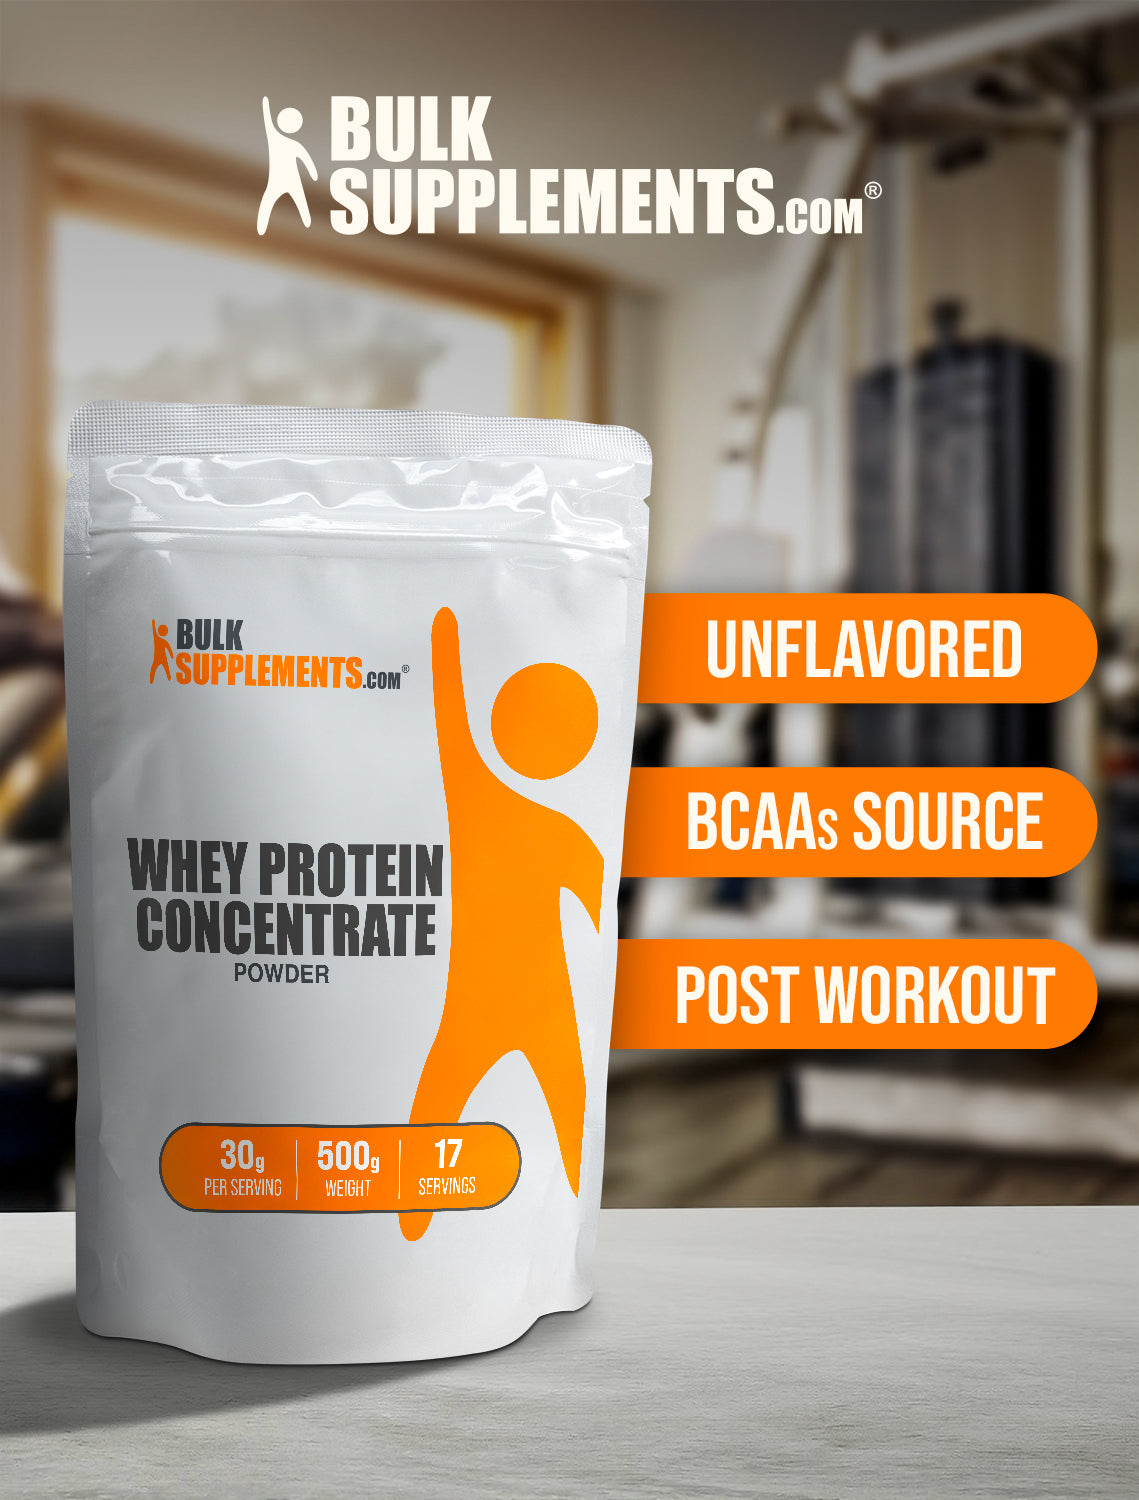 Whey protein concentrate powder 500g keywords image